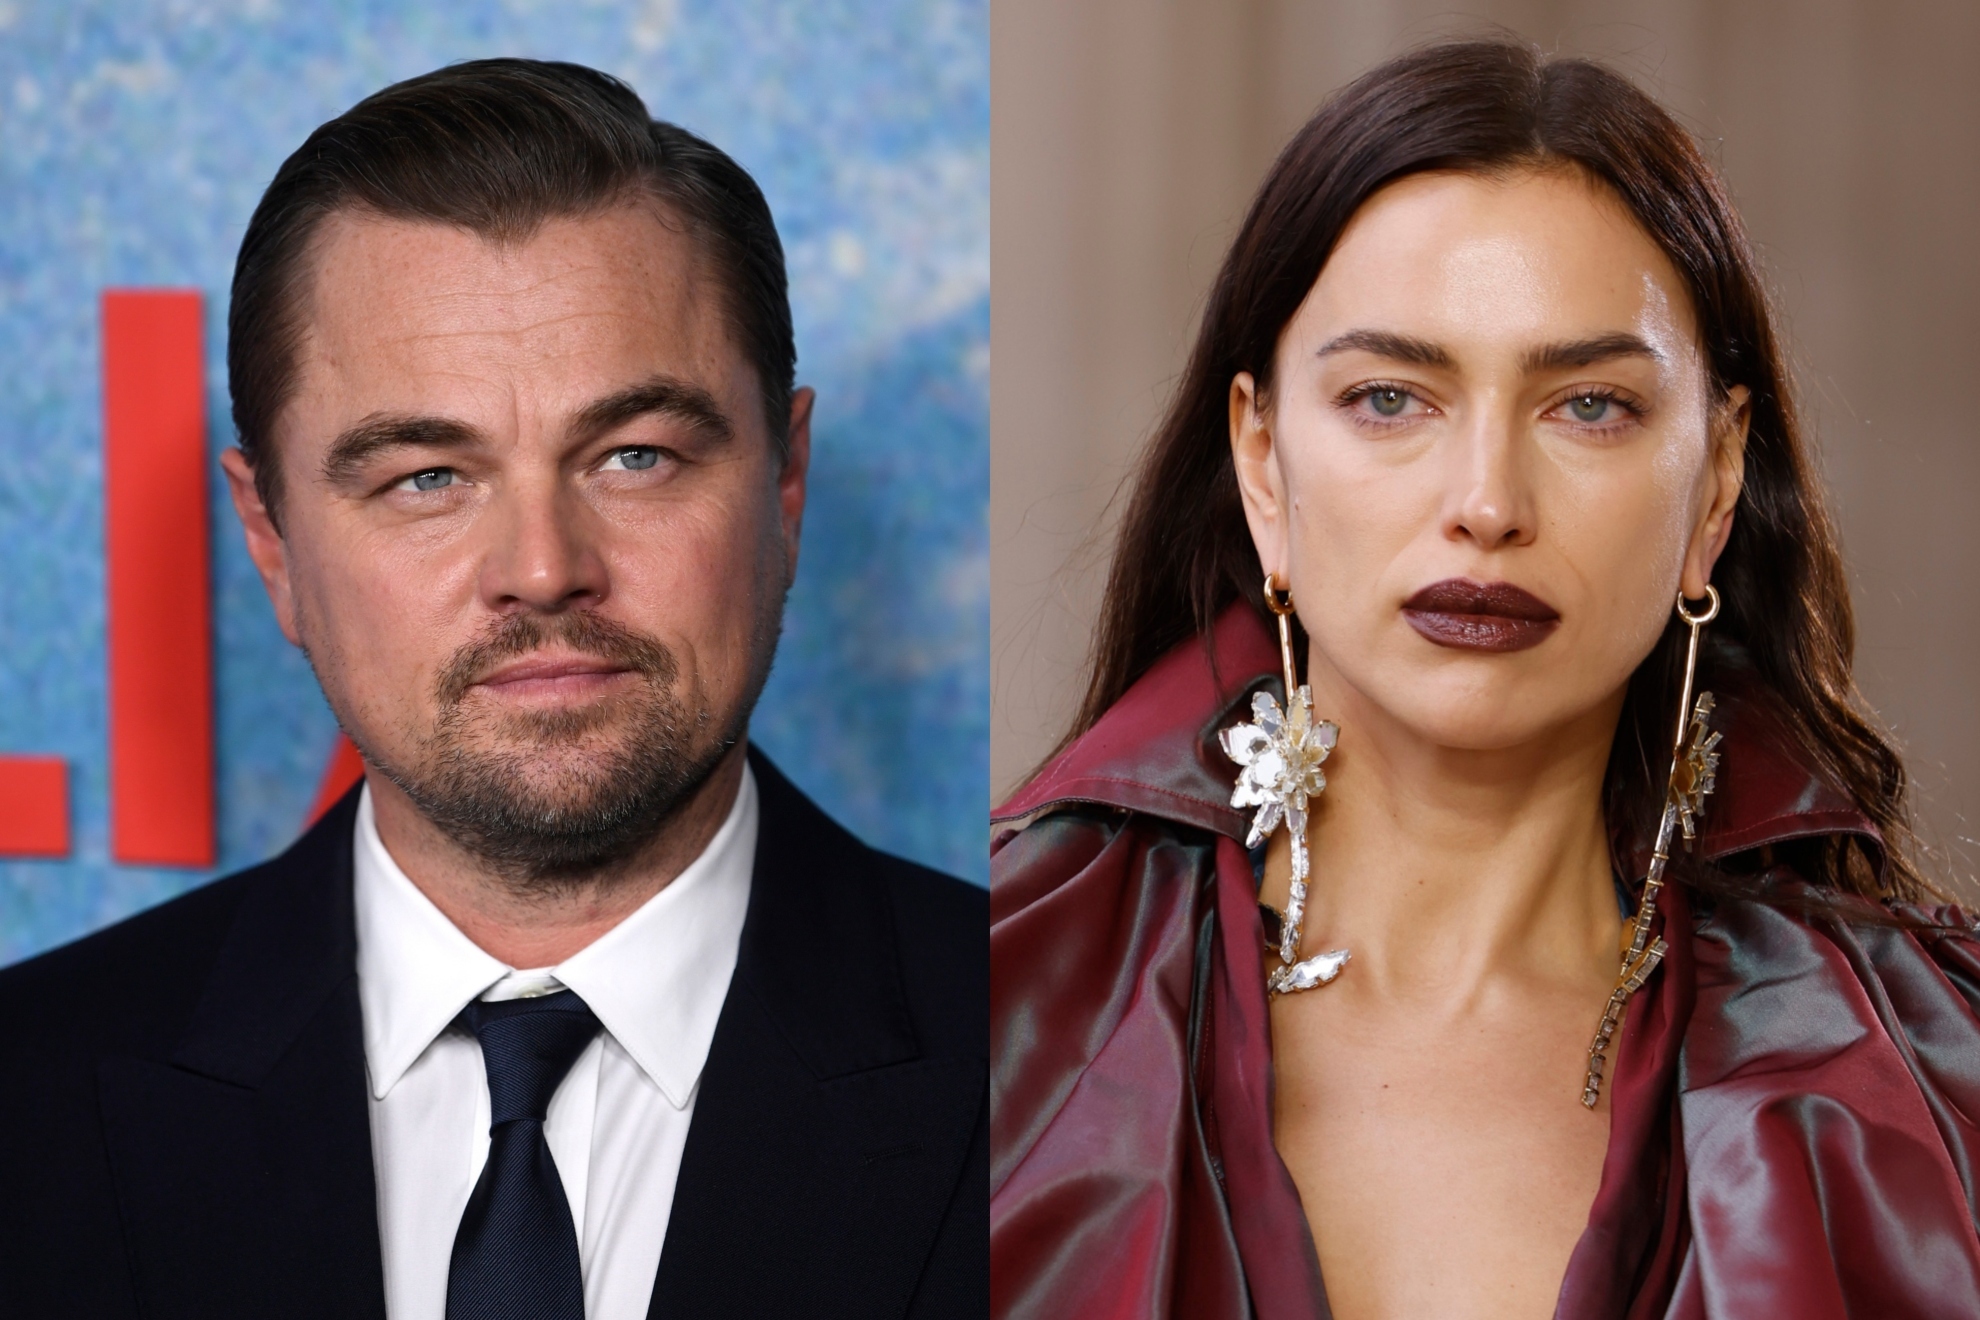 Leo and Irina just friends? Insiders spill the tea on their Coachella weekend